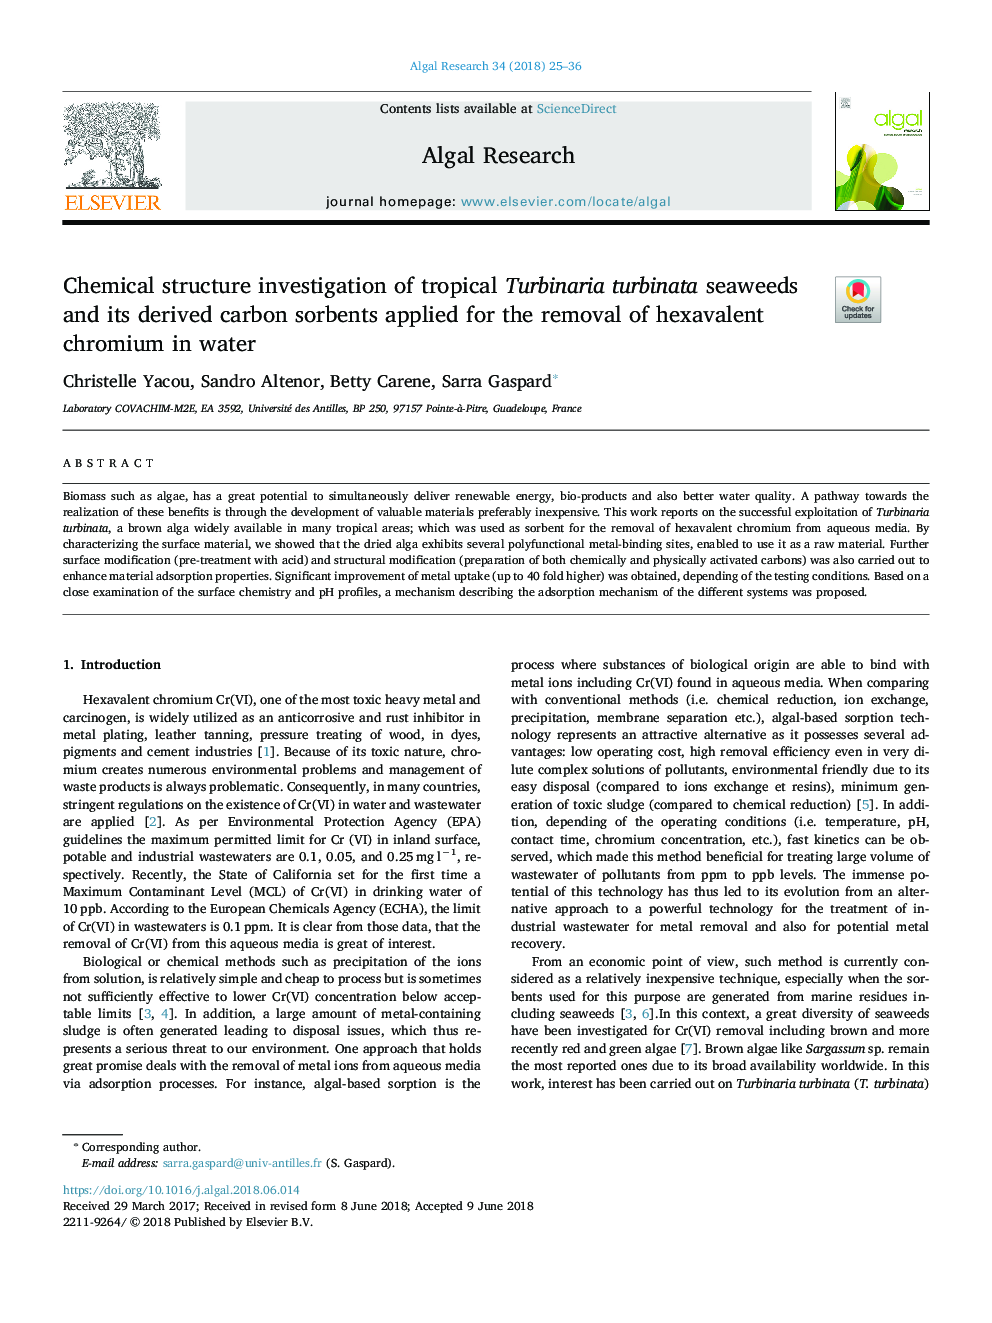 Chemical structure investigation of tropical Turbinaria turbinata seaweeds and its derived carbon sorbents applied for the removal of hexavalent chromium in water